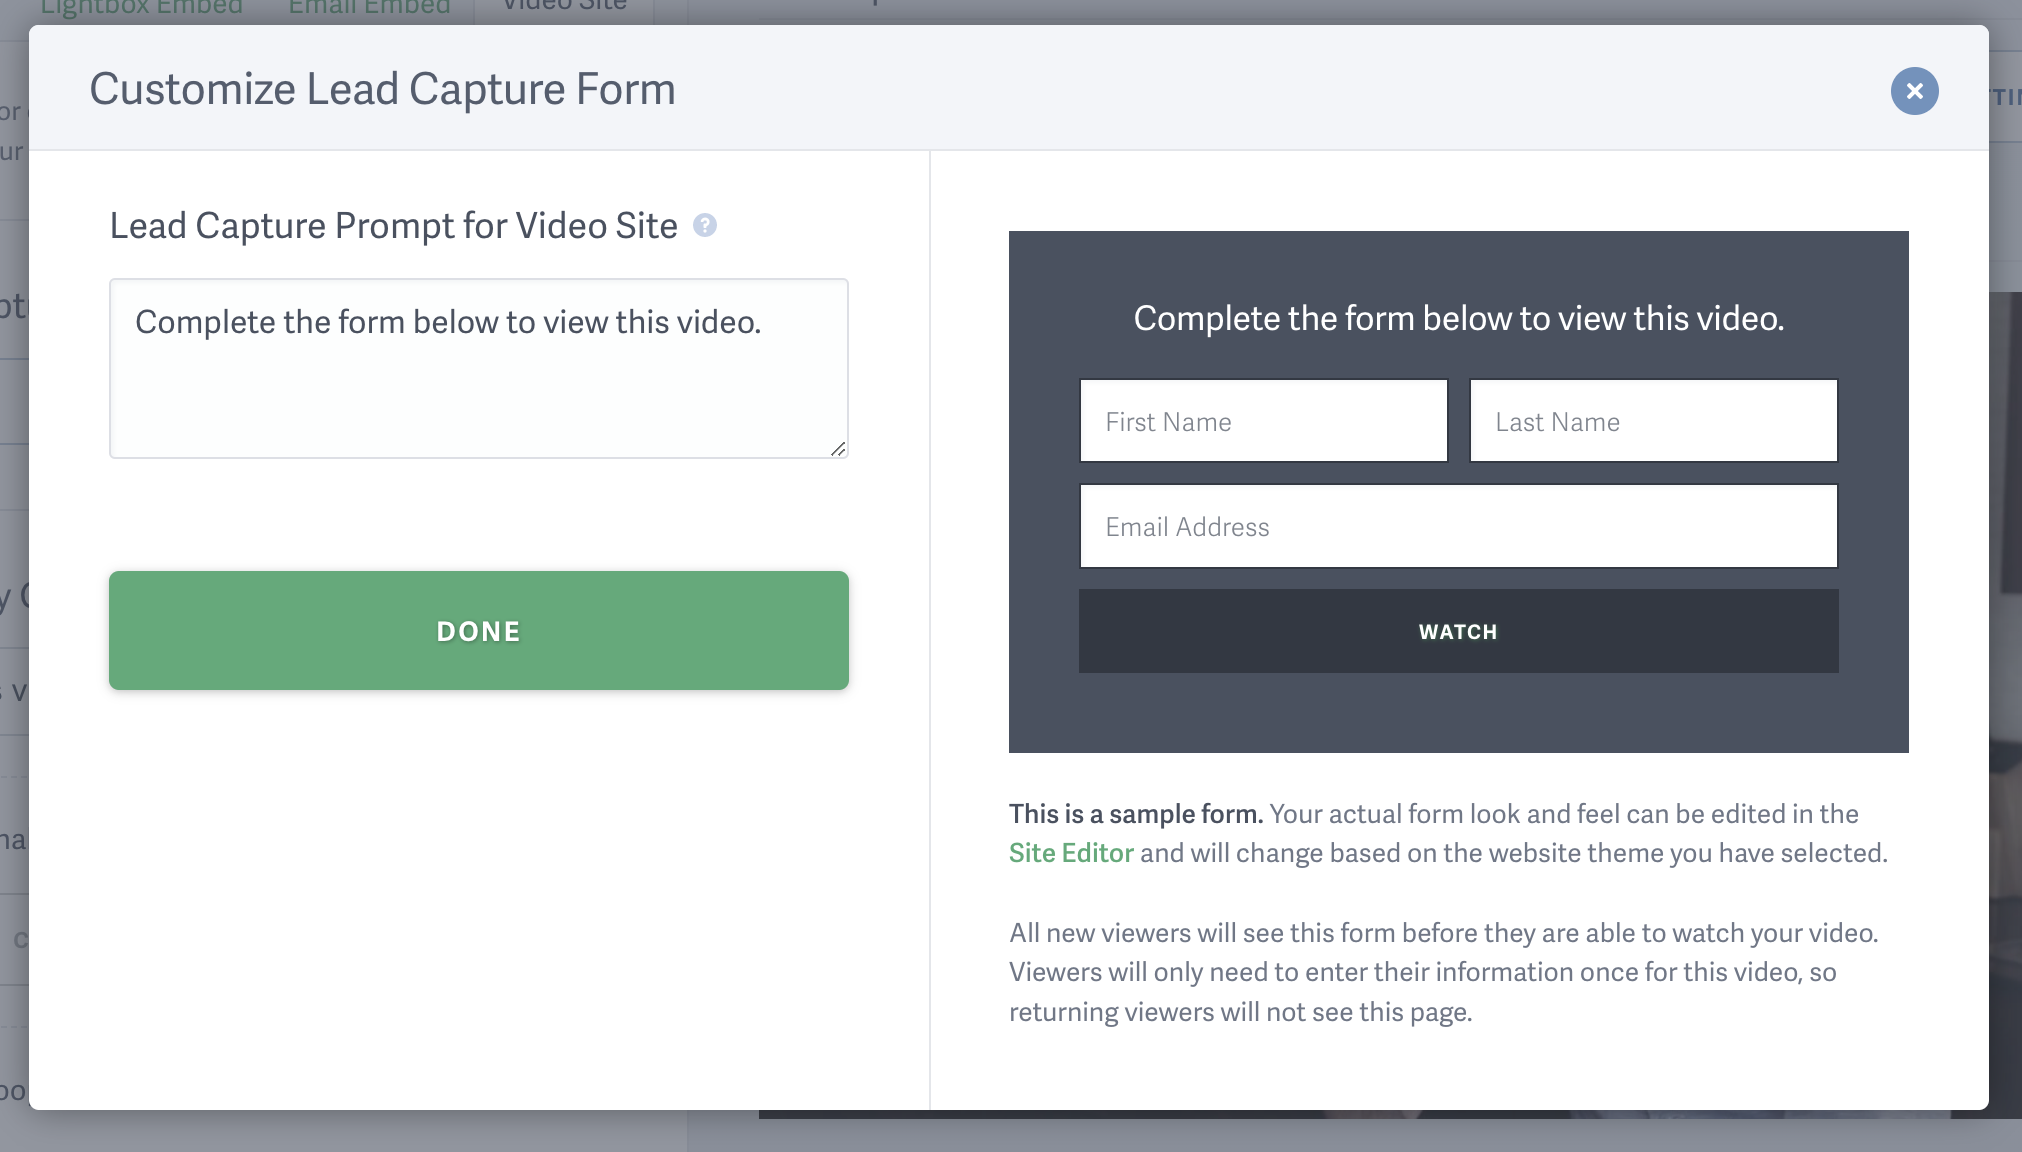 Customize Lead Capture For Video Site